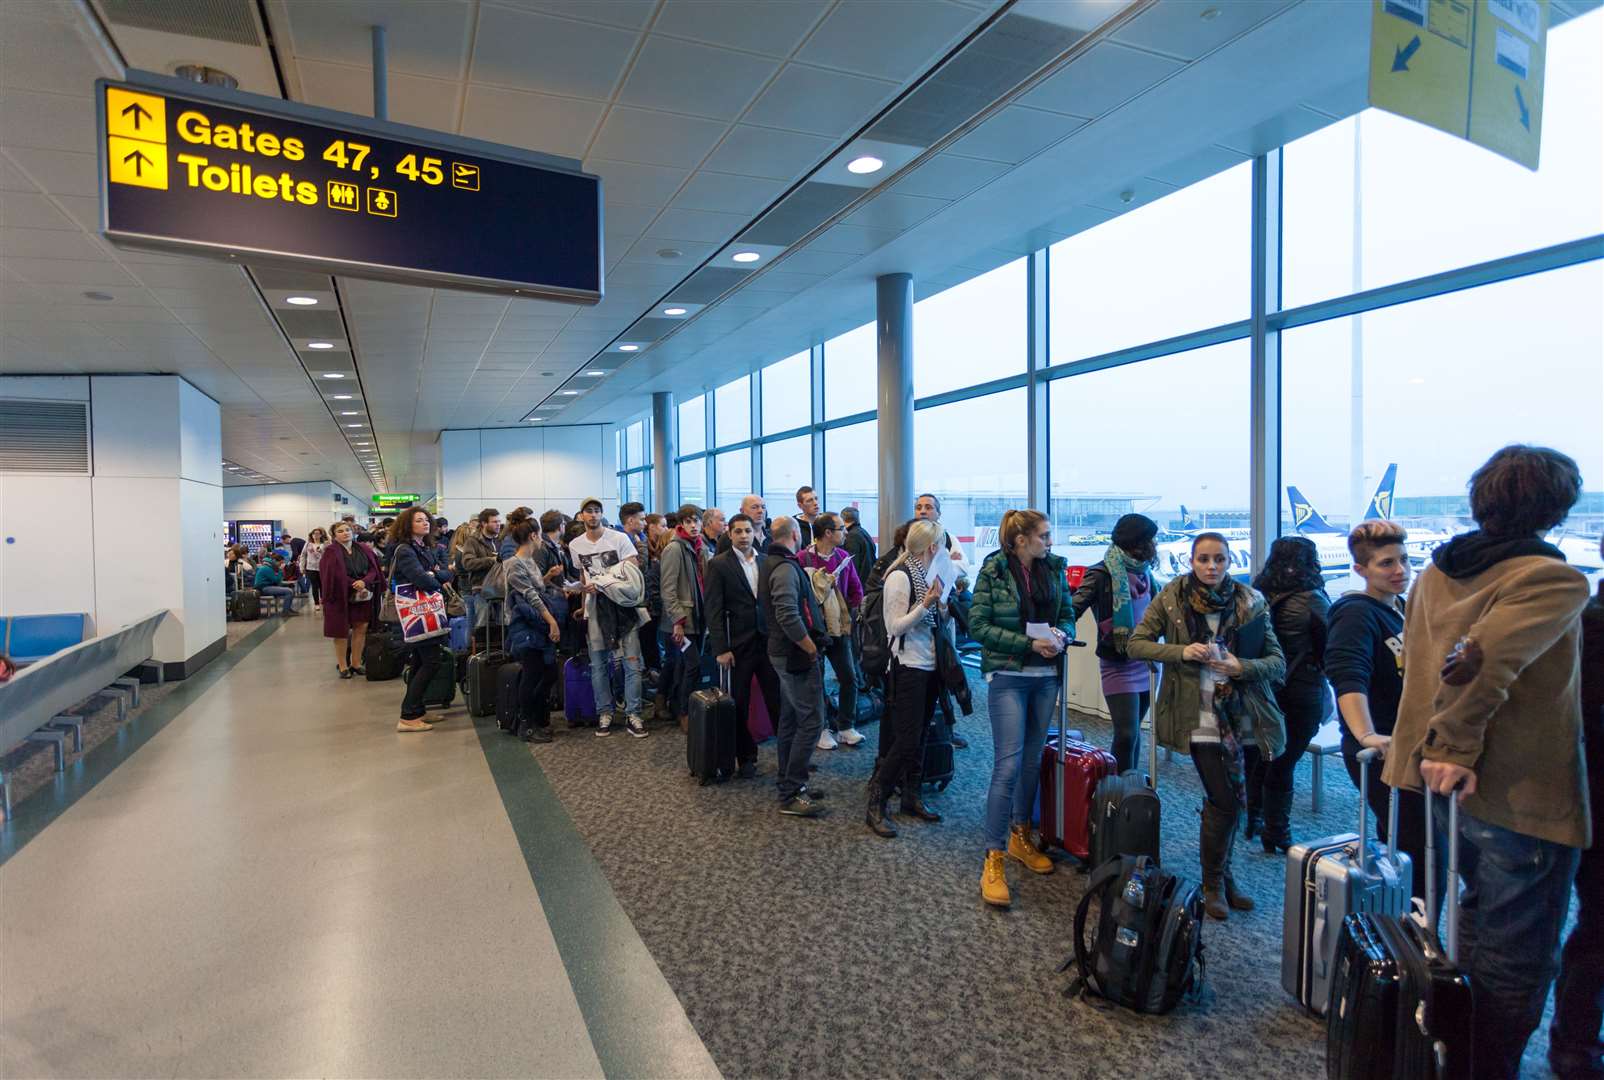 The government hopes to avoid long queues at airports this summer that hold passengers up